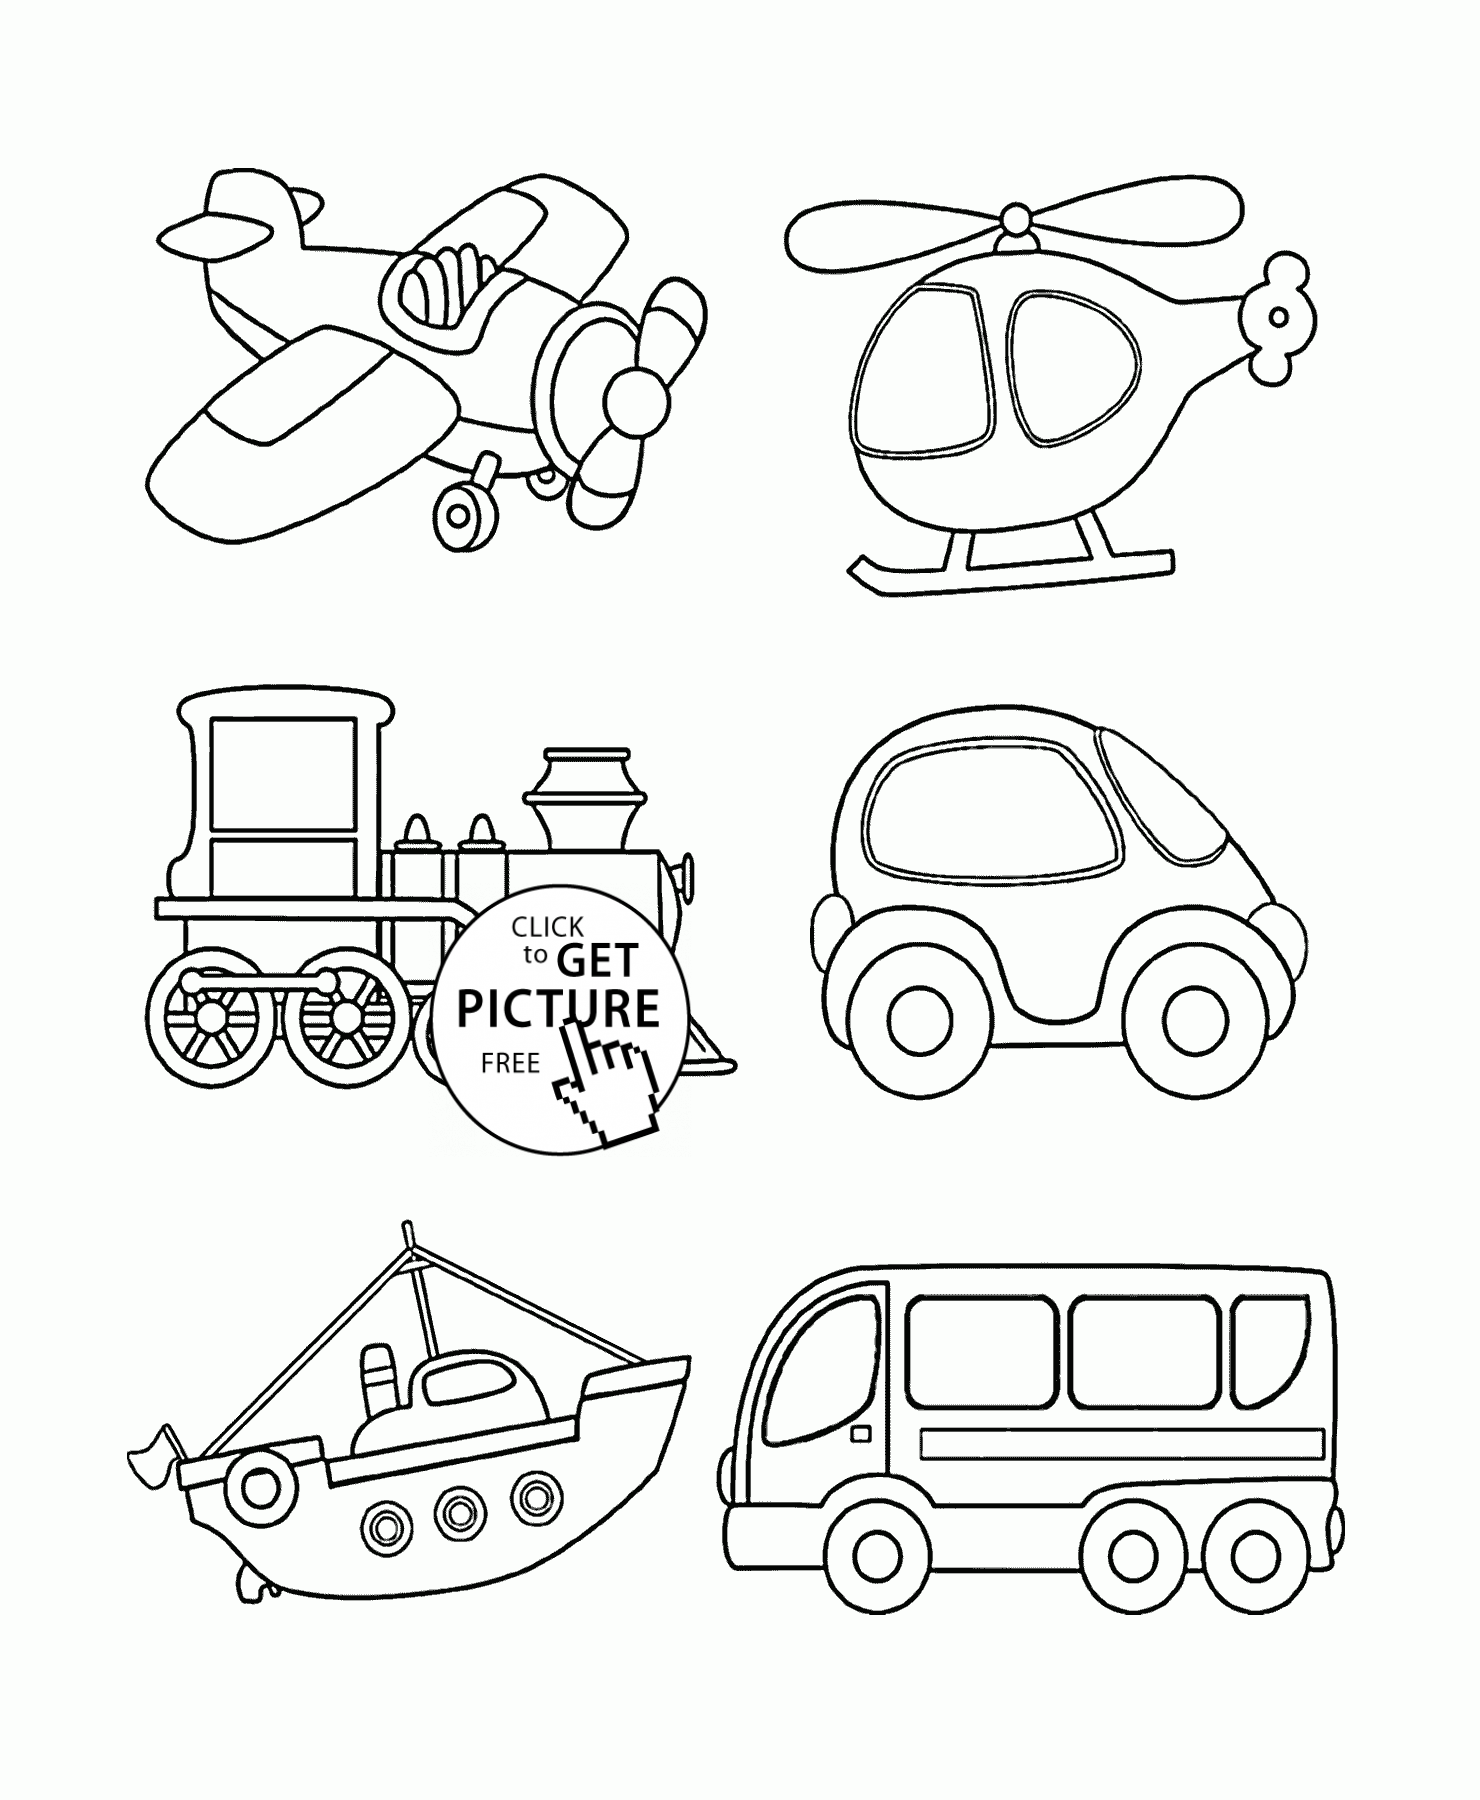 Transportation coloring page for toddlers coloring pages printables free